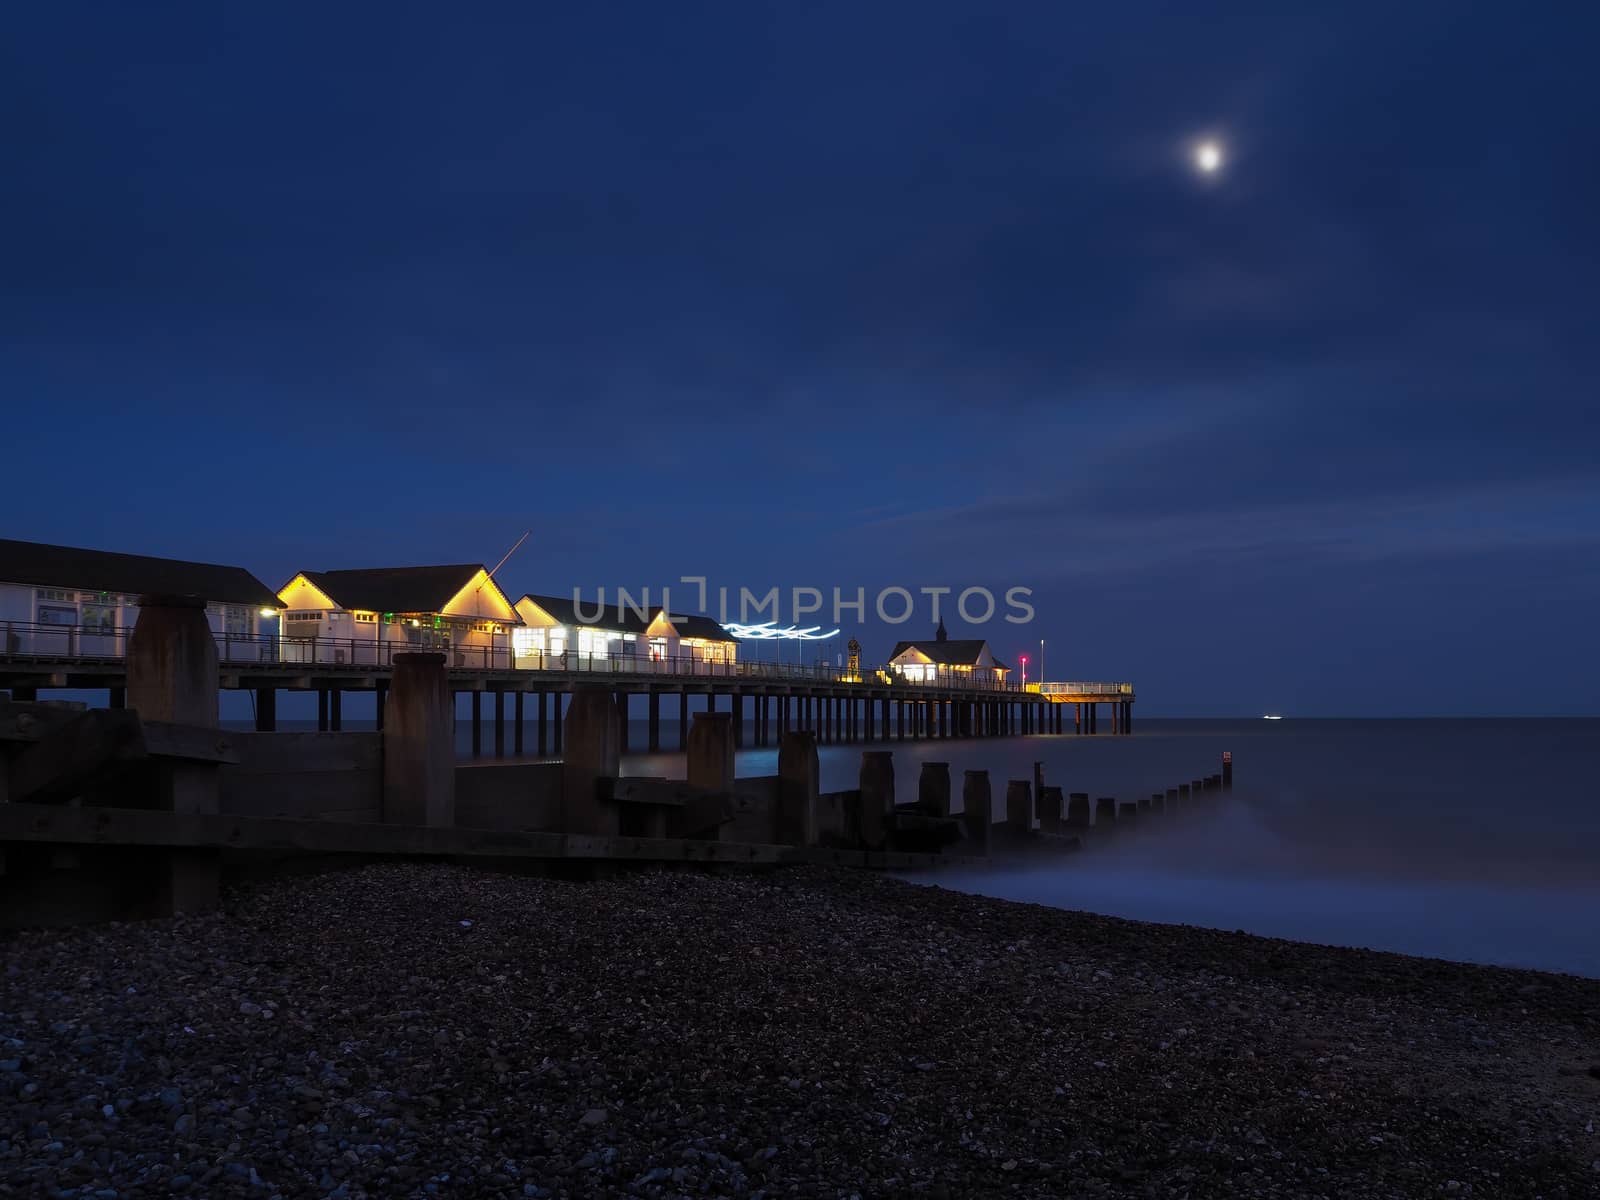 Southwold Pier with buildings and lights lit up at night and waves flowing onto a pebble beach next to a wooden groyne under a bright moon with a ship on the horizon, Suffolk, UK